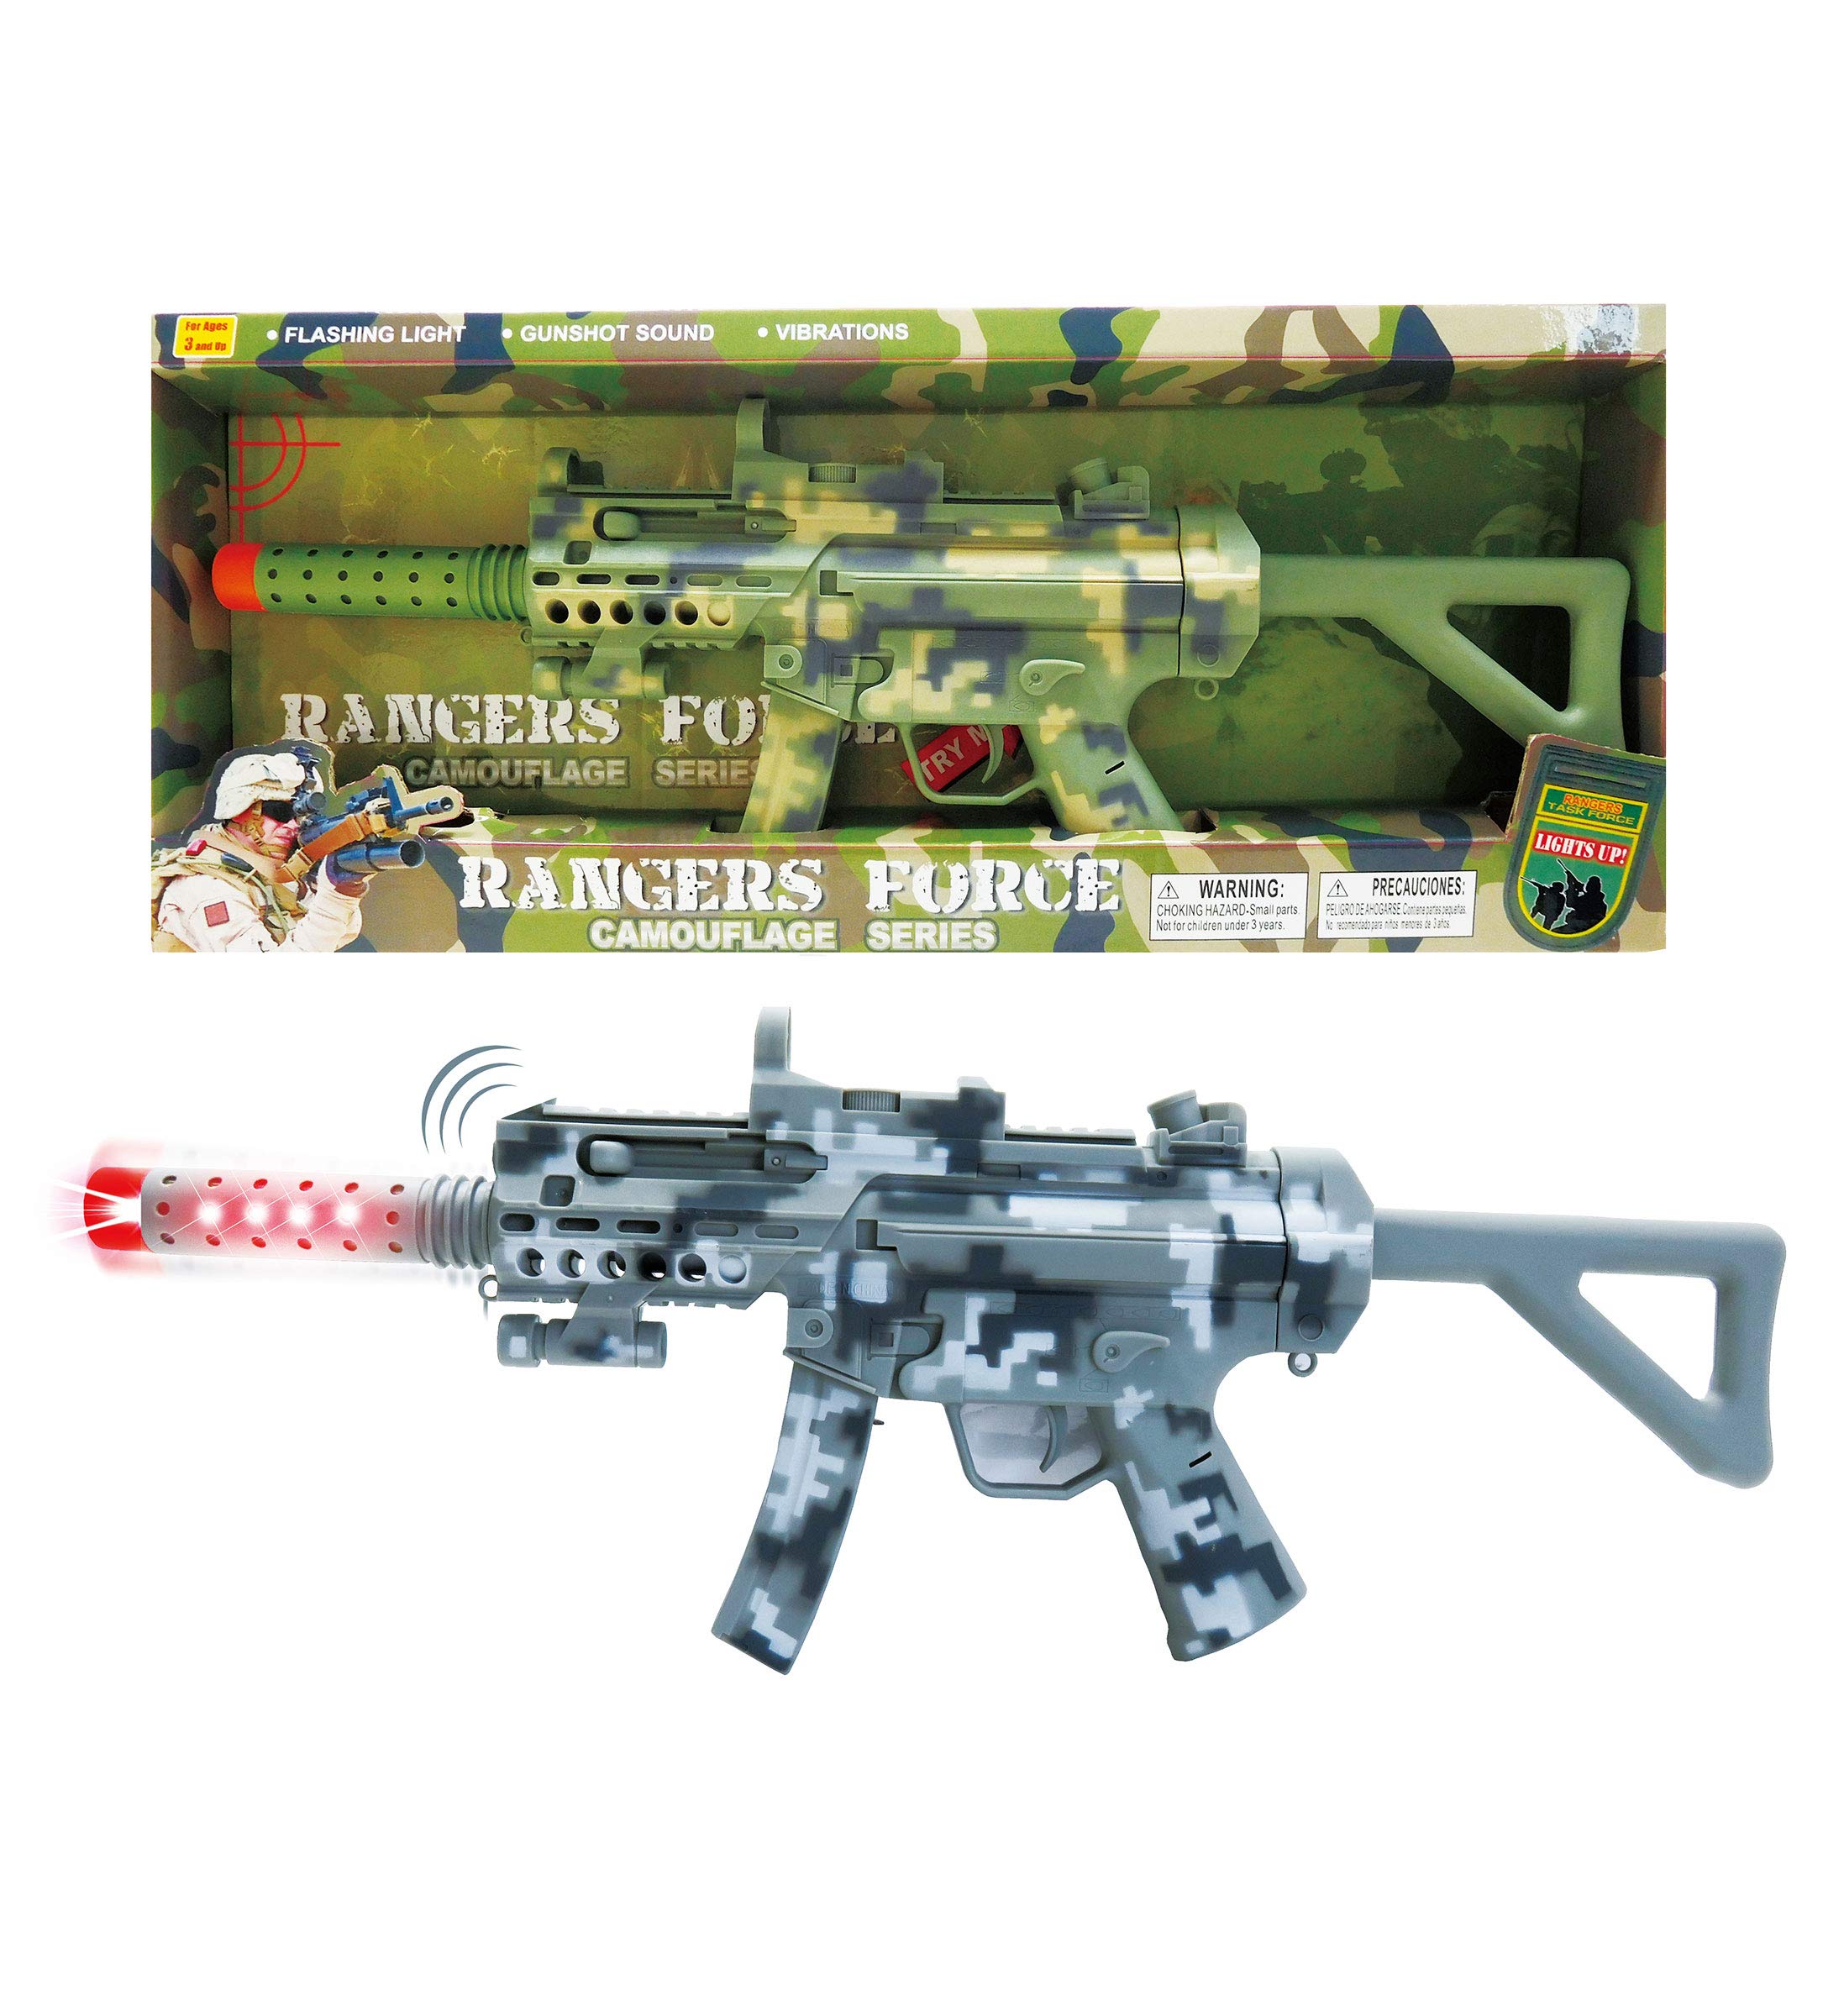 Mozlly Light Up Military Combat Force Camouflage Machine Gun - Rangers Force Camouflage Toy Gun with Vibration LEDs and Sounds, Perfect for Pretend Play, Dress Up, Cosplay - 21.5 Inch, Color May Vary